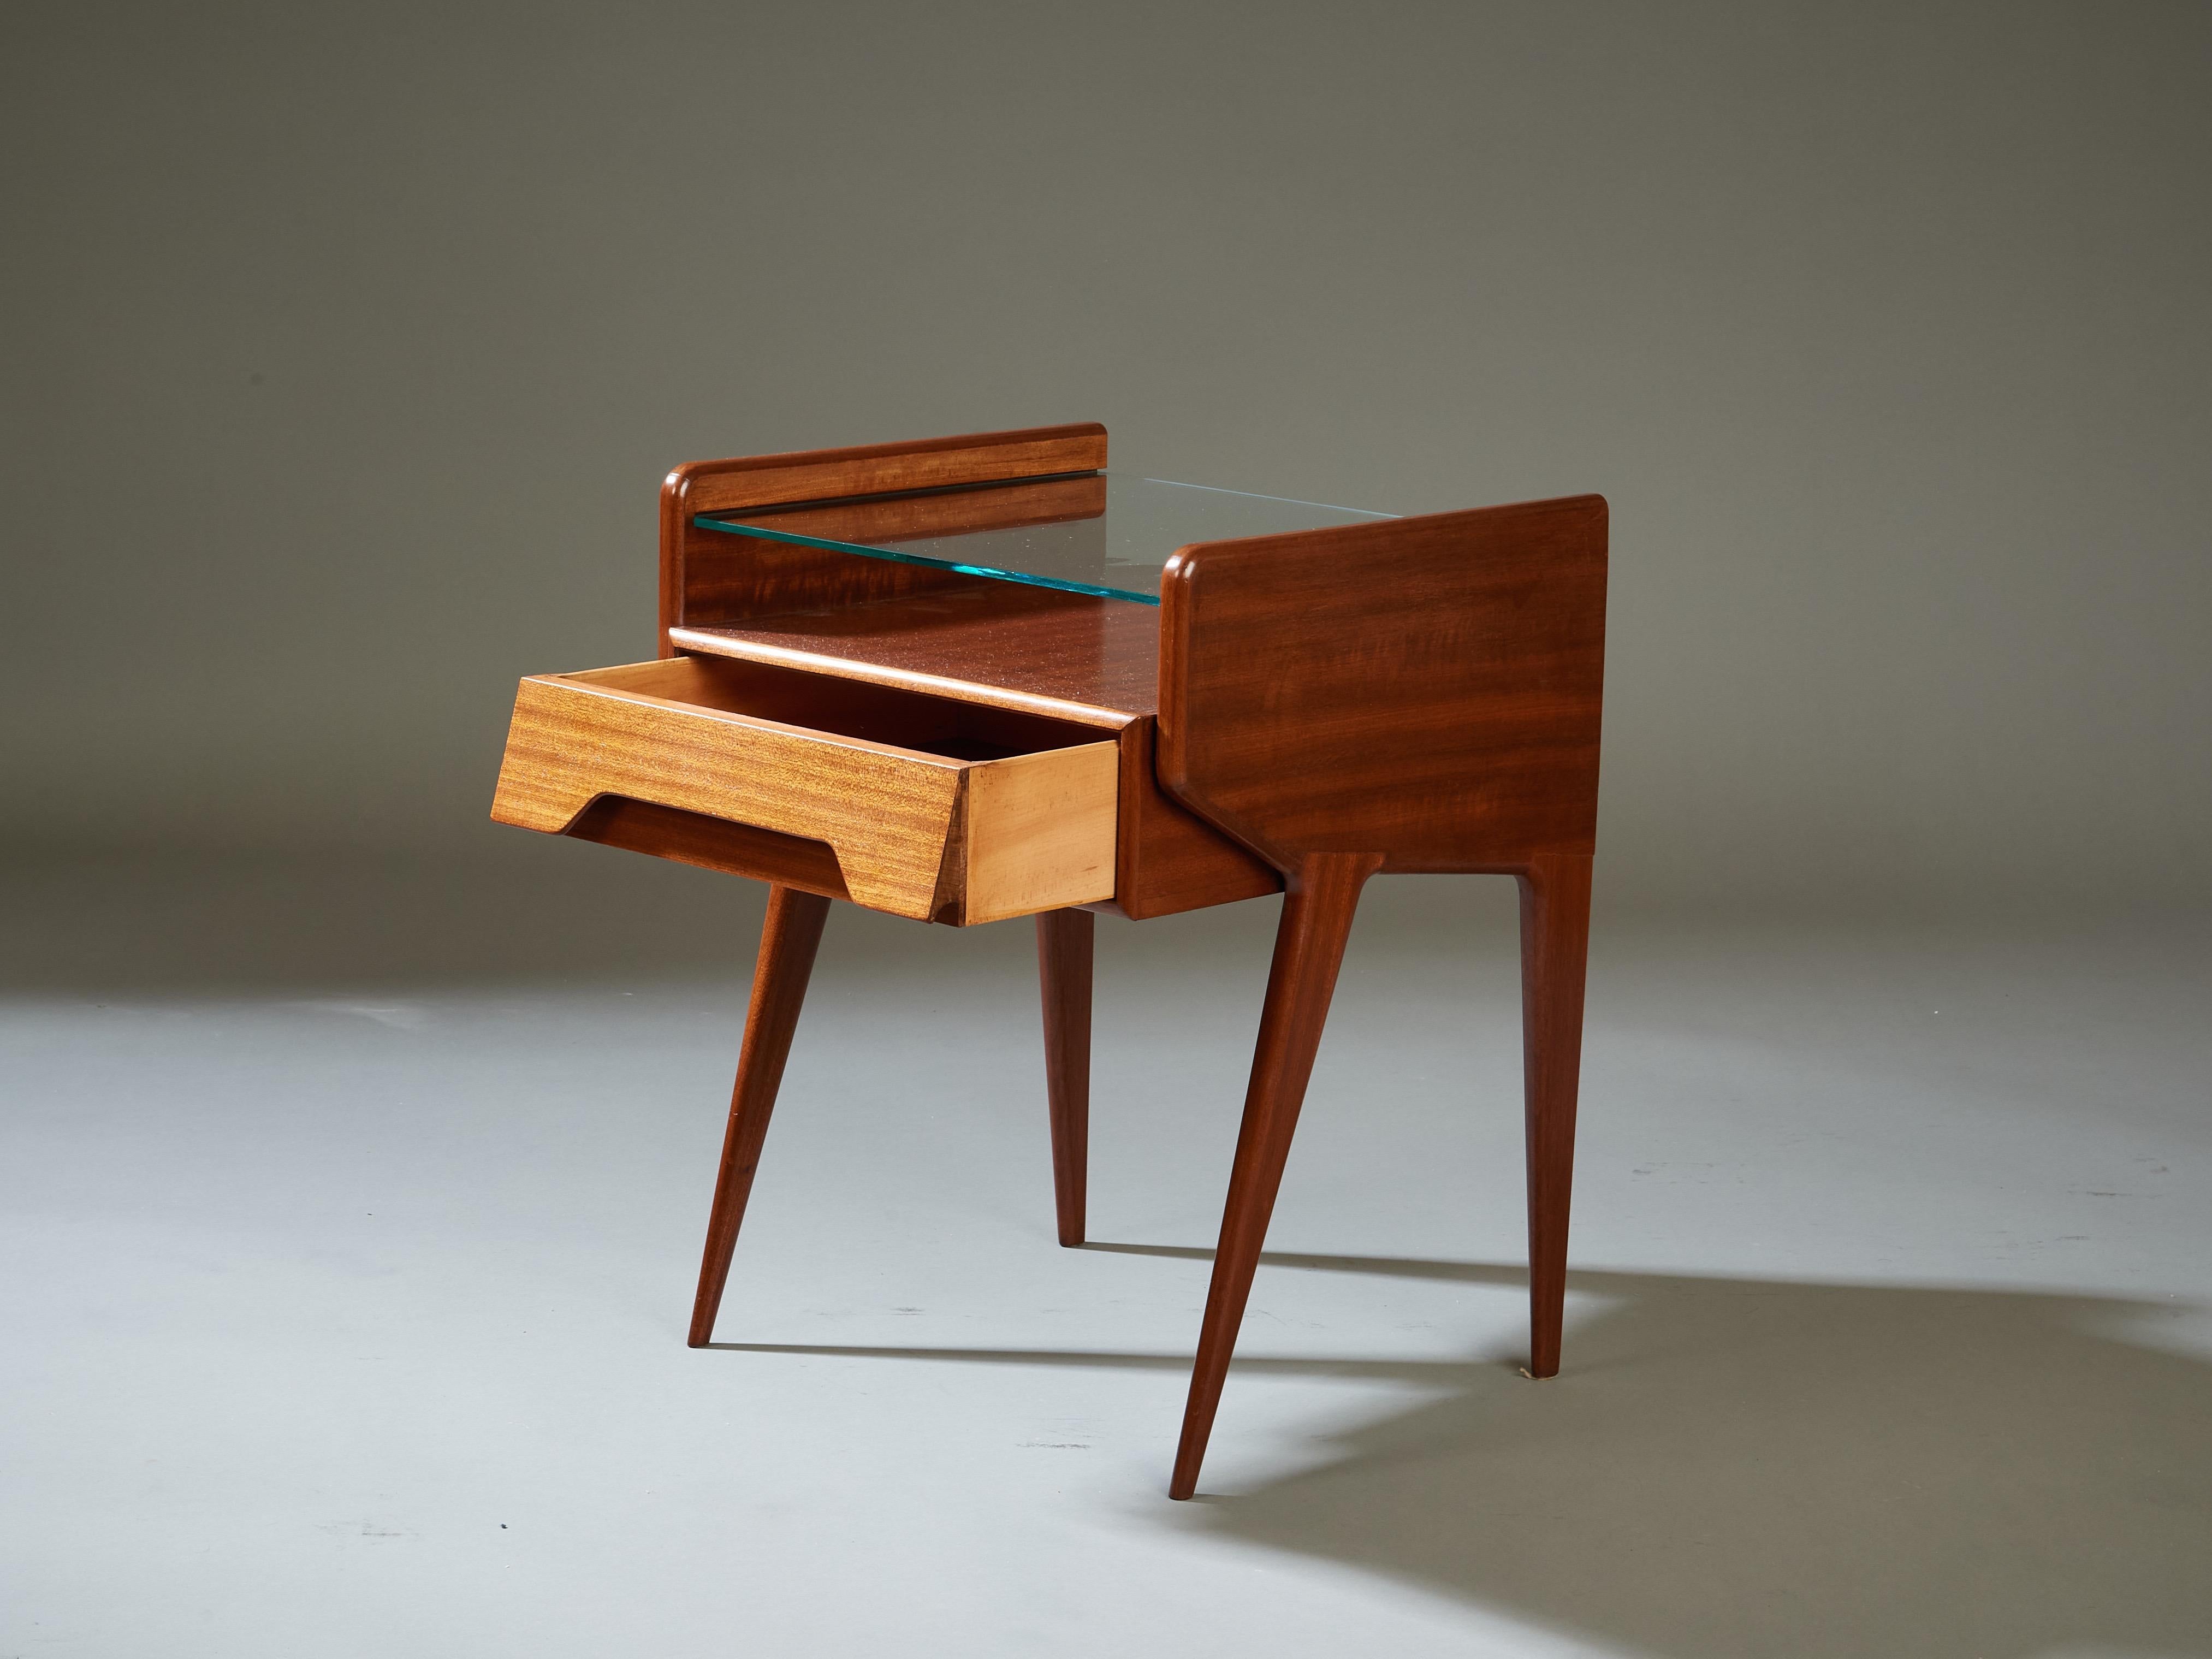 Pair of Organic Modern Mahogany & Glass Nightstands ITSO Ico Parisi, Italy 1950s For Sale 6